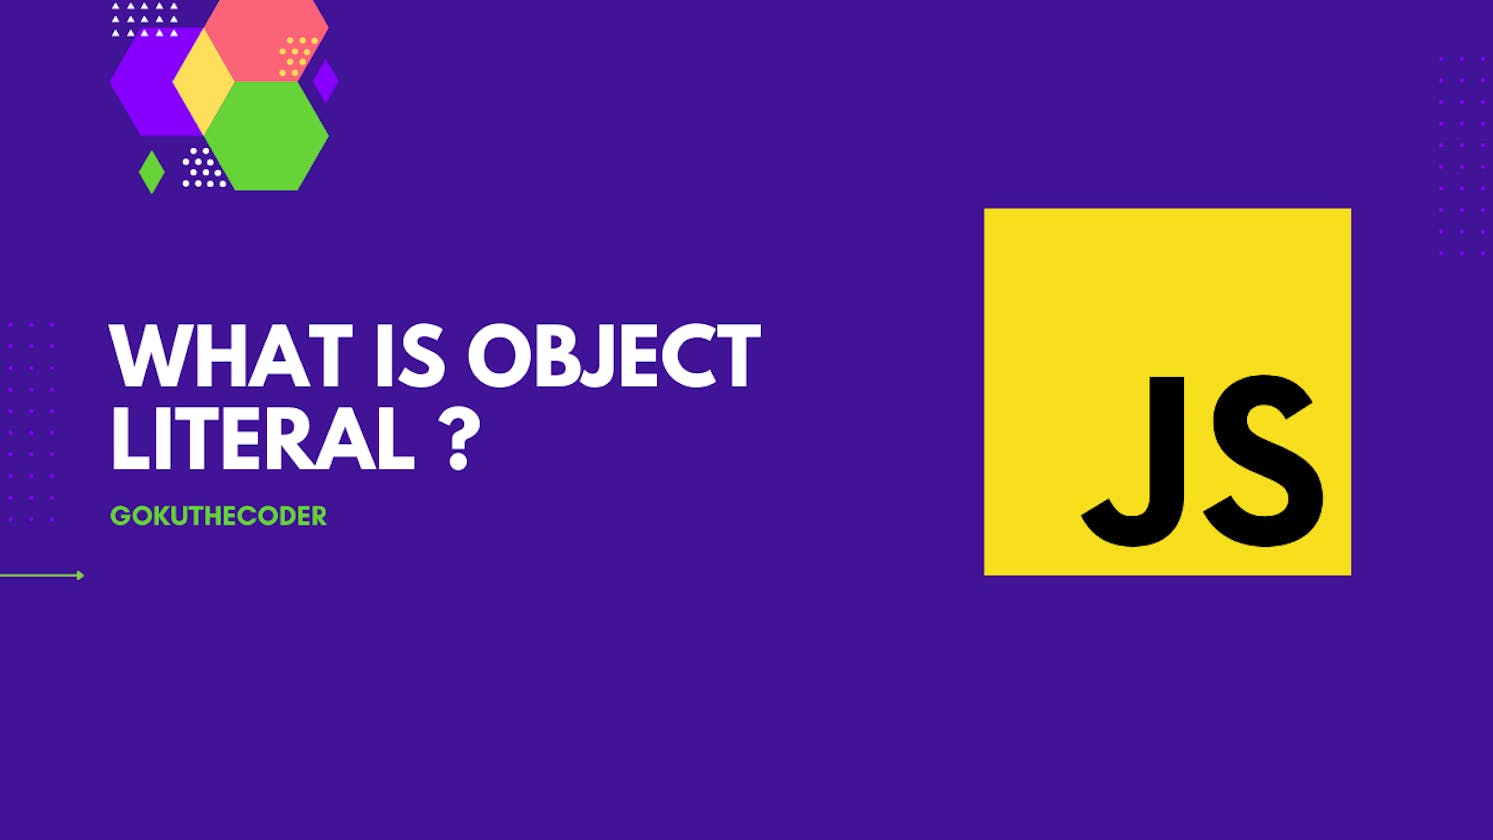 What is object literal ?